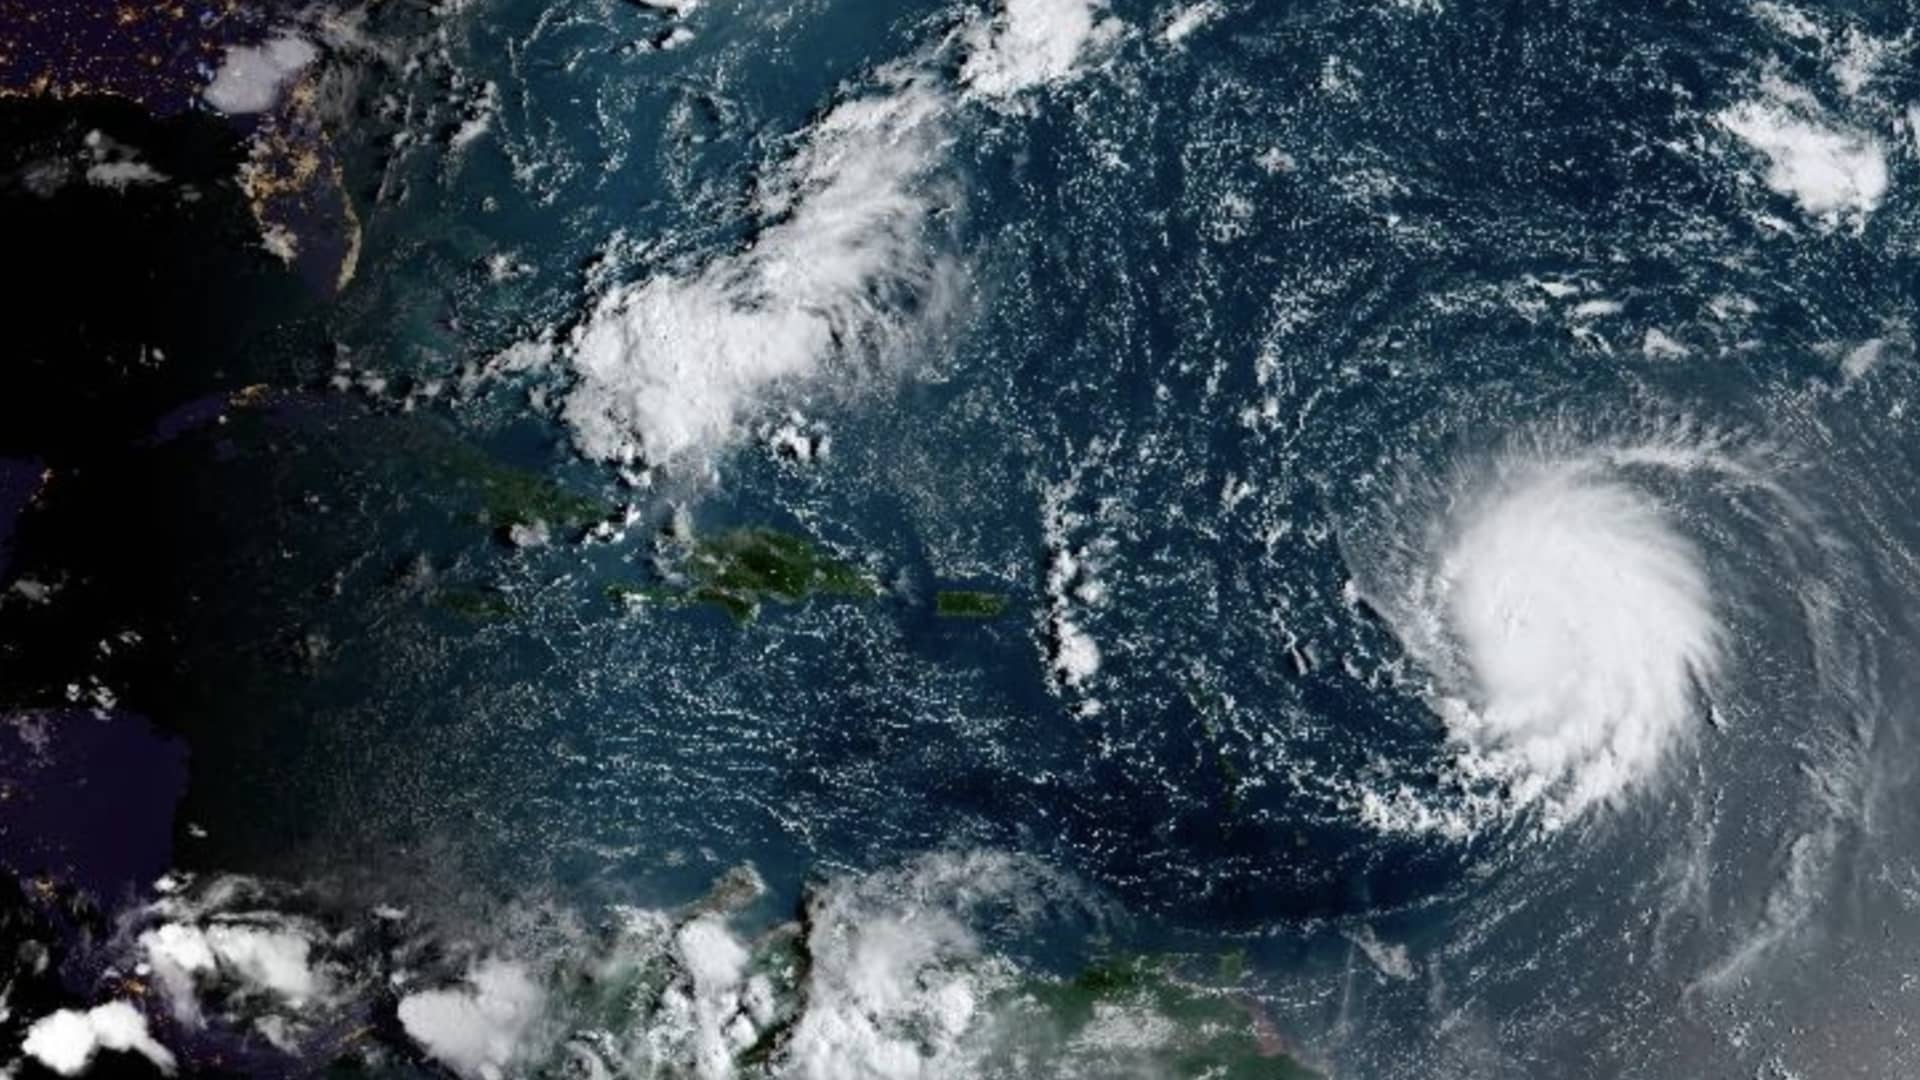 Hurricane Lee barrels through open Atlantic waters as the season’s first Category 5 storm